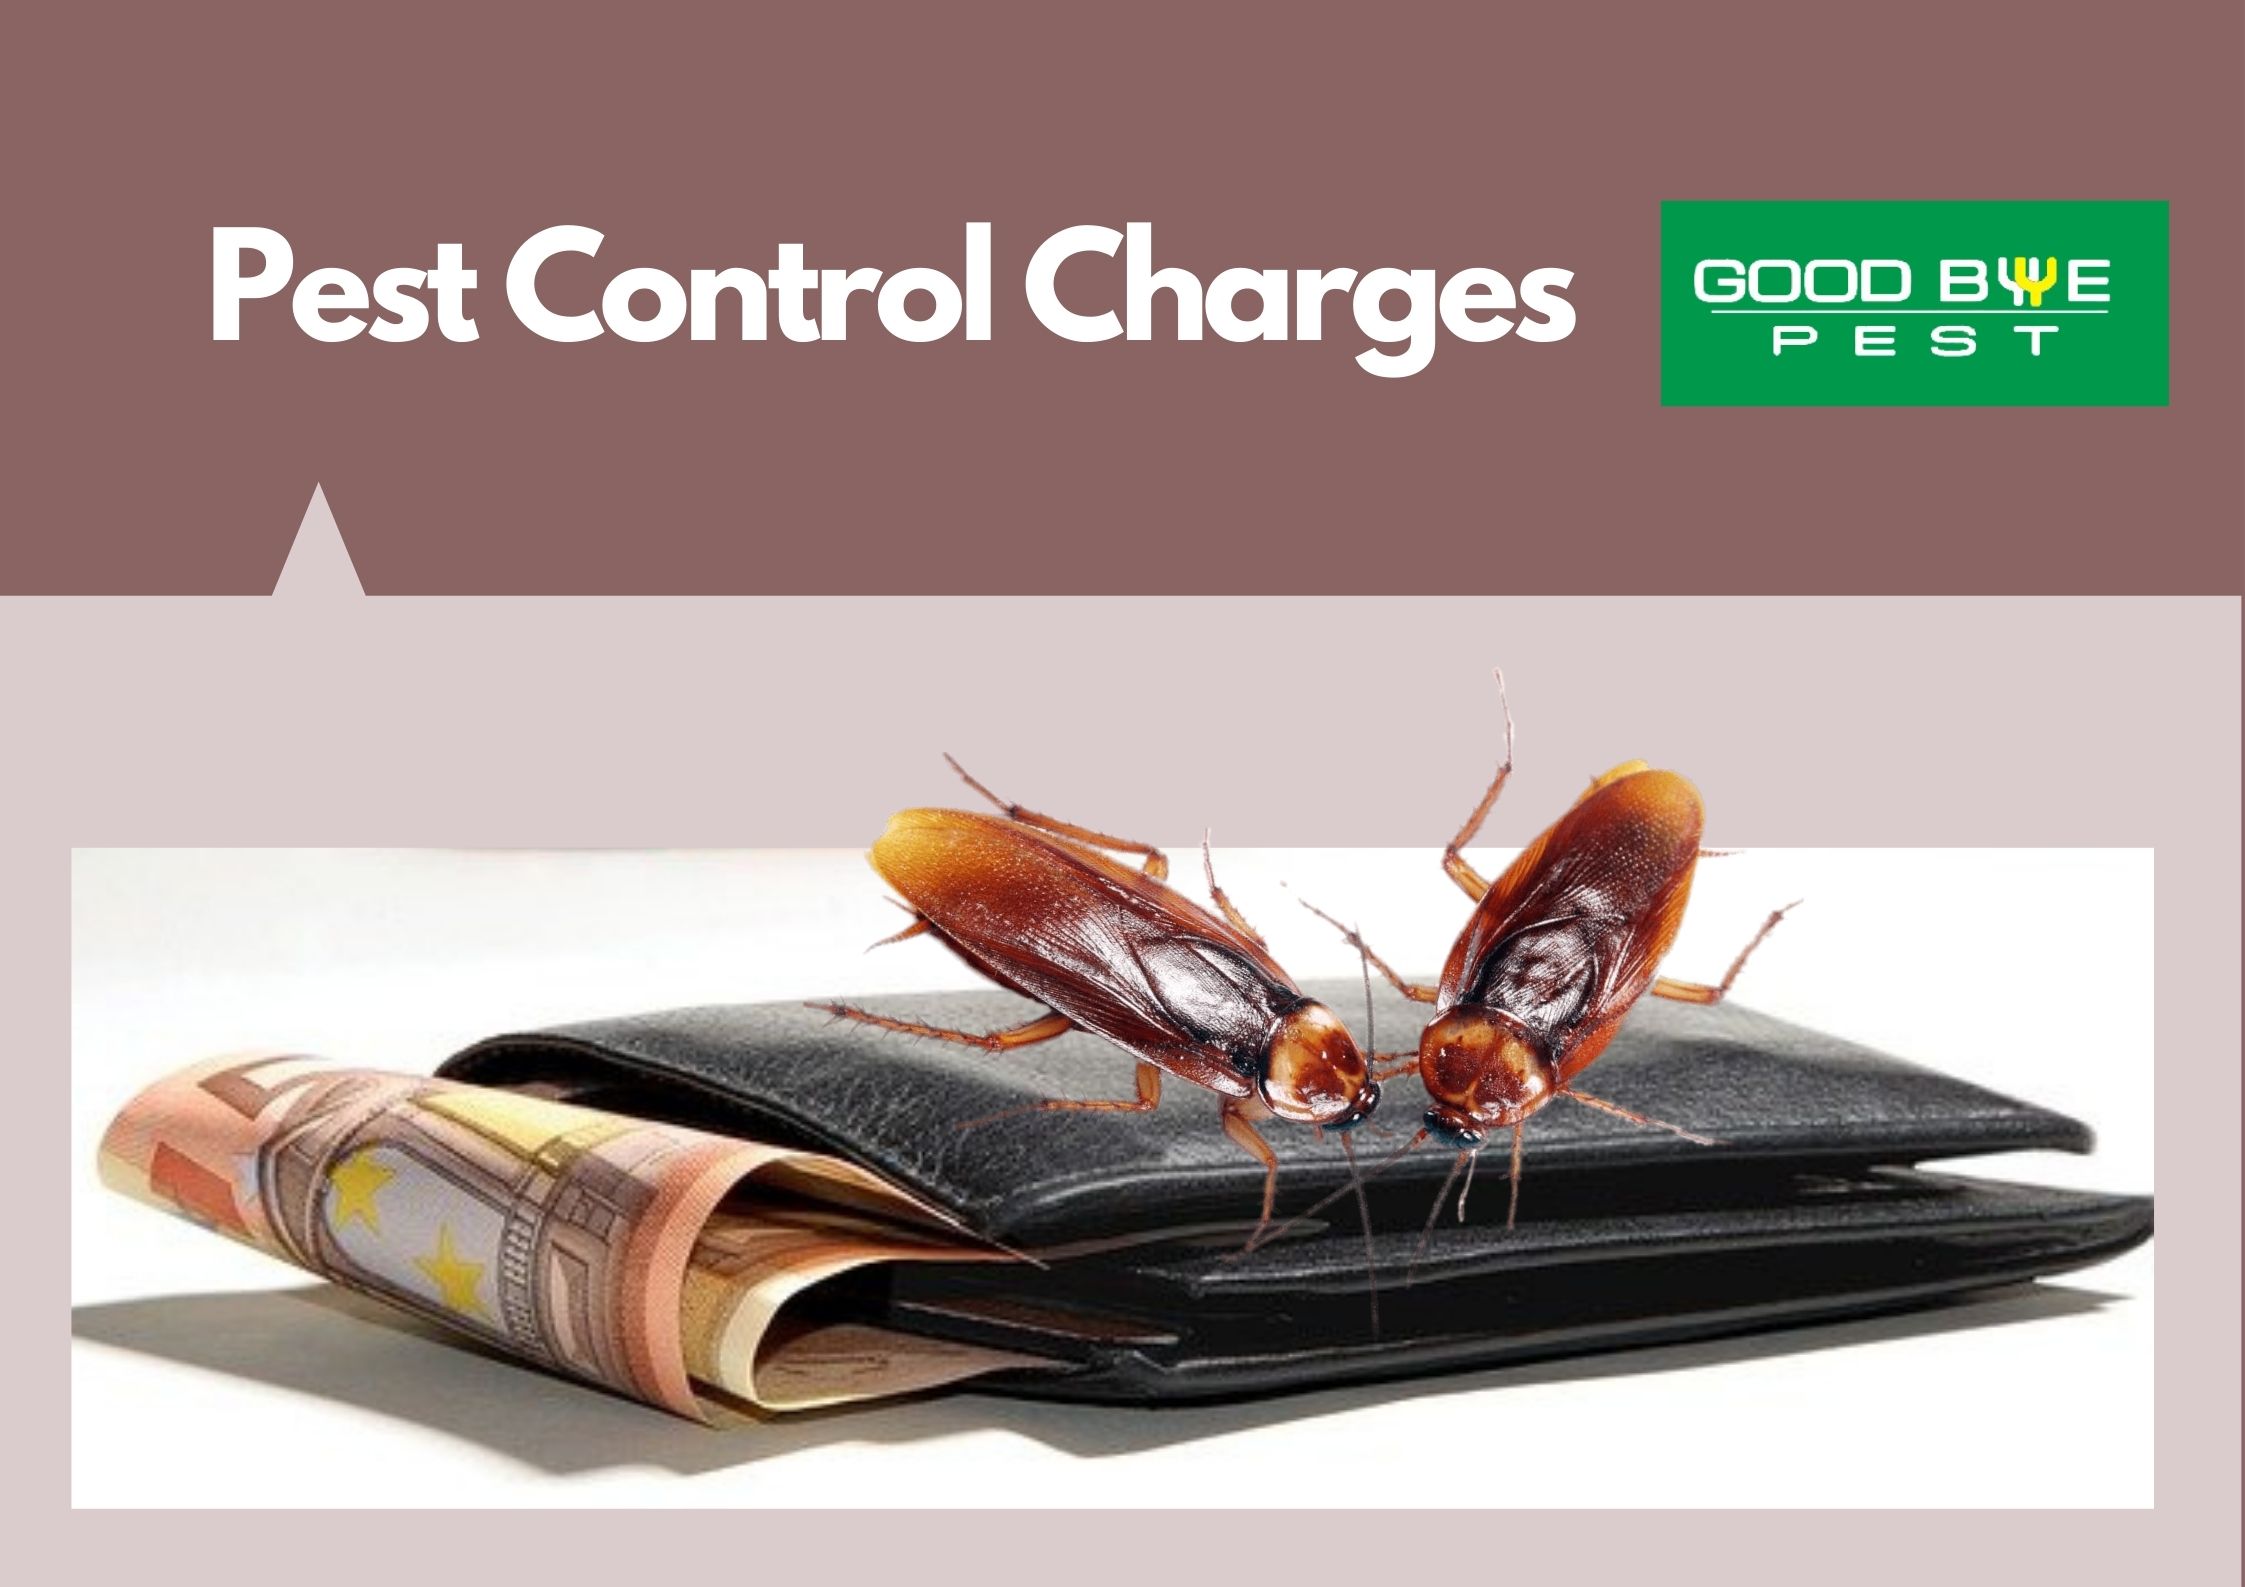 Pest Control Charges for cockroaches